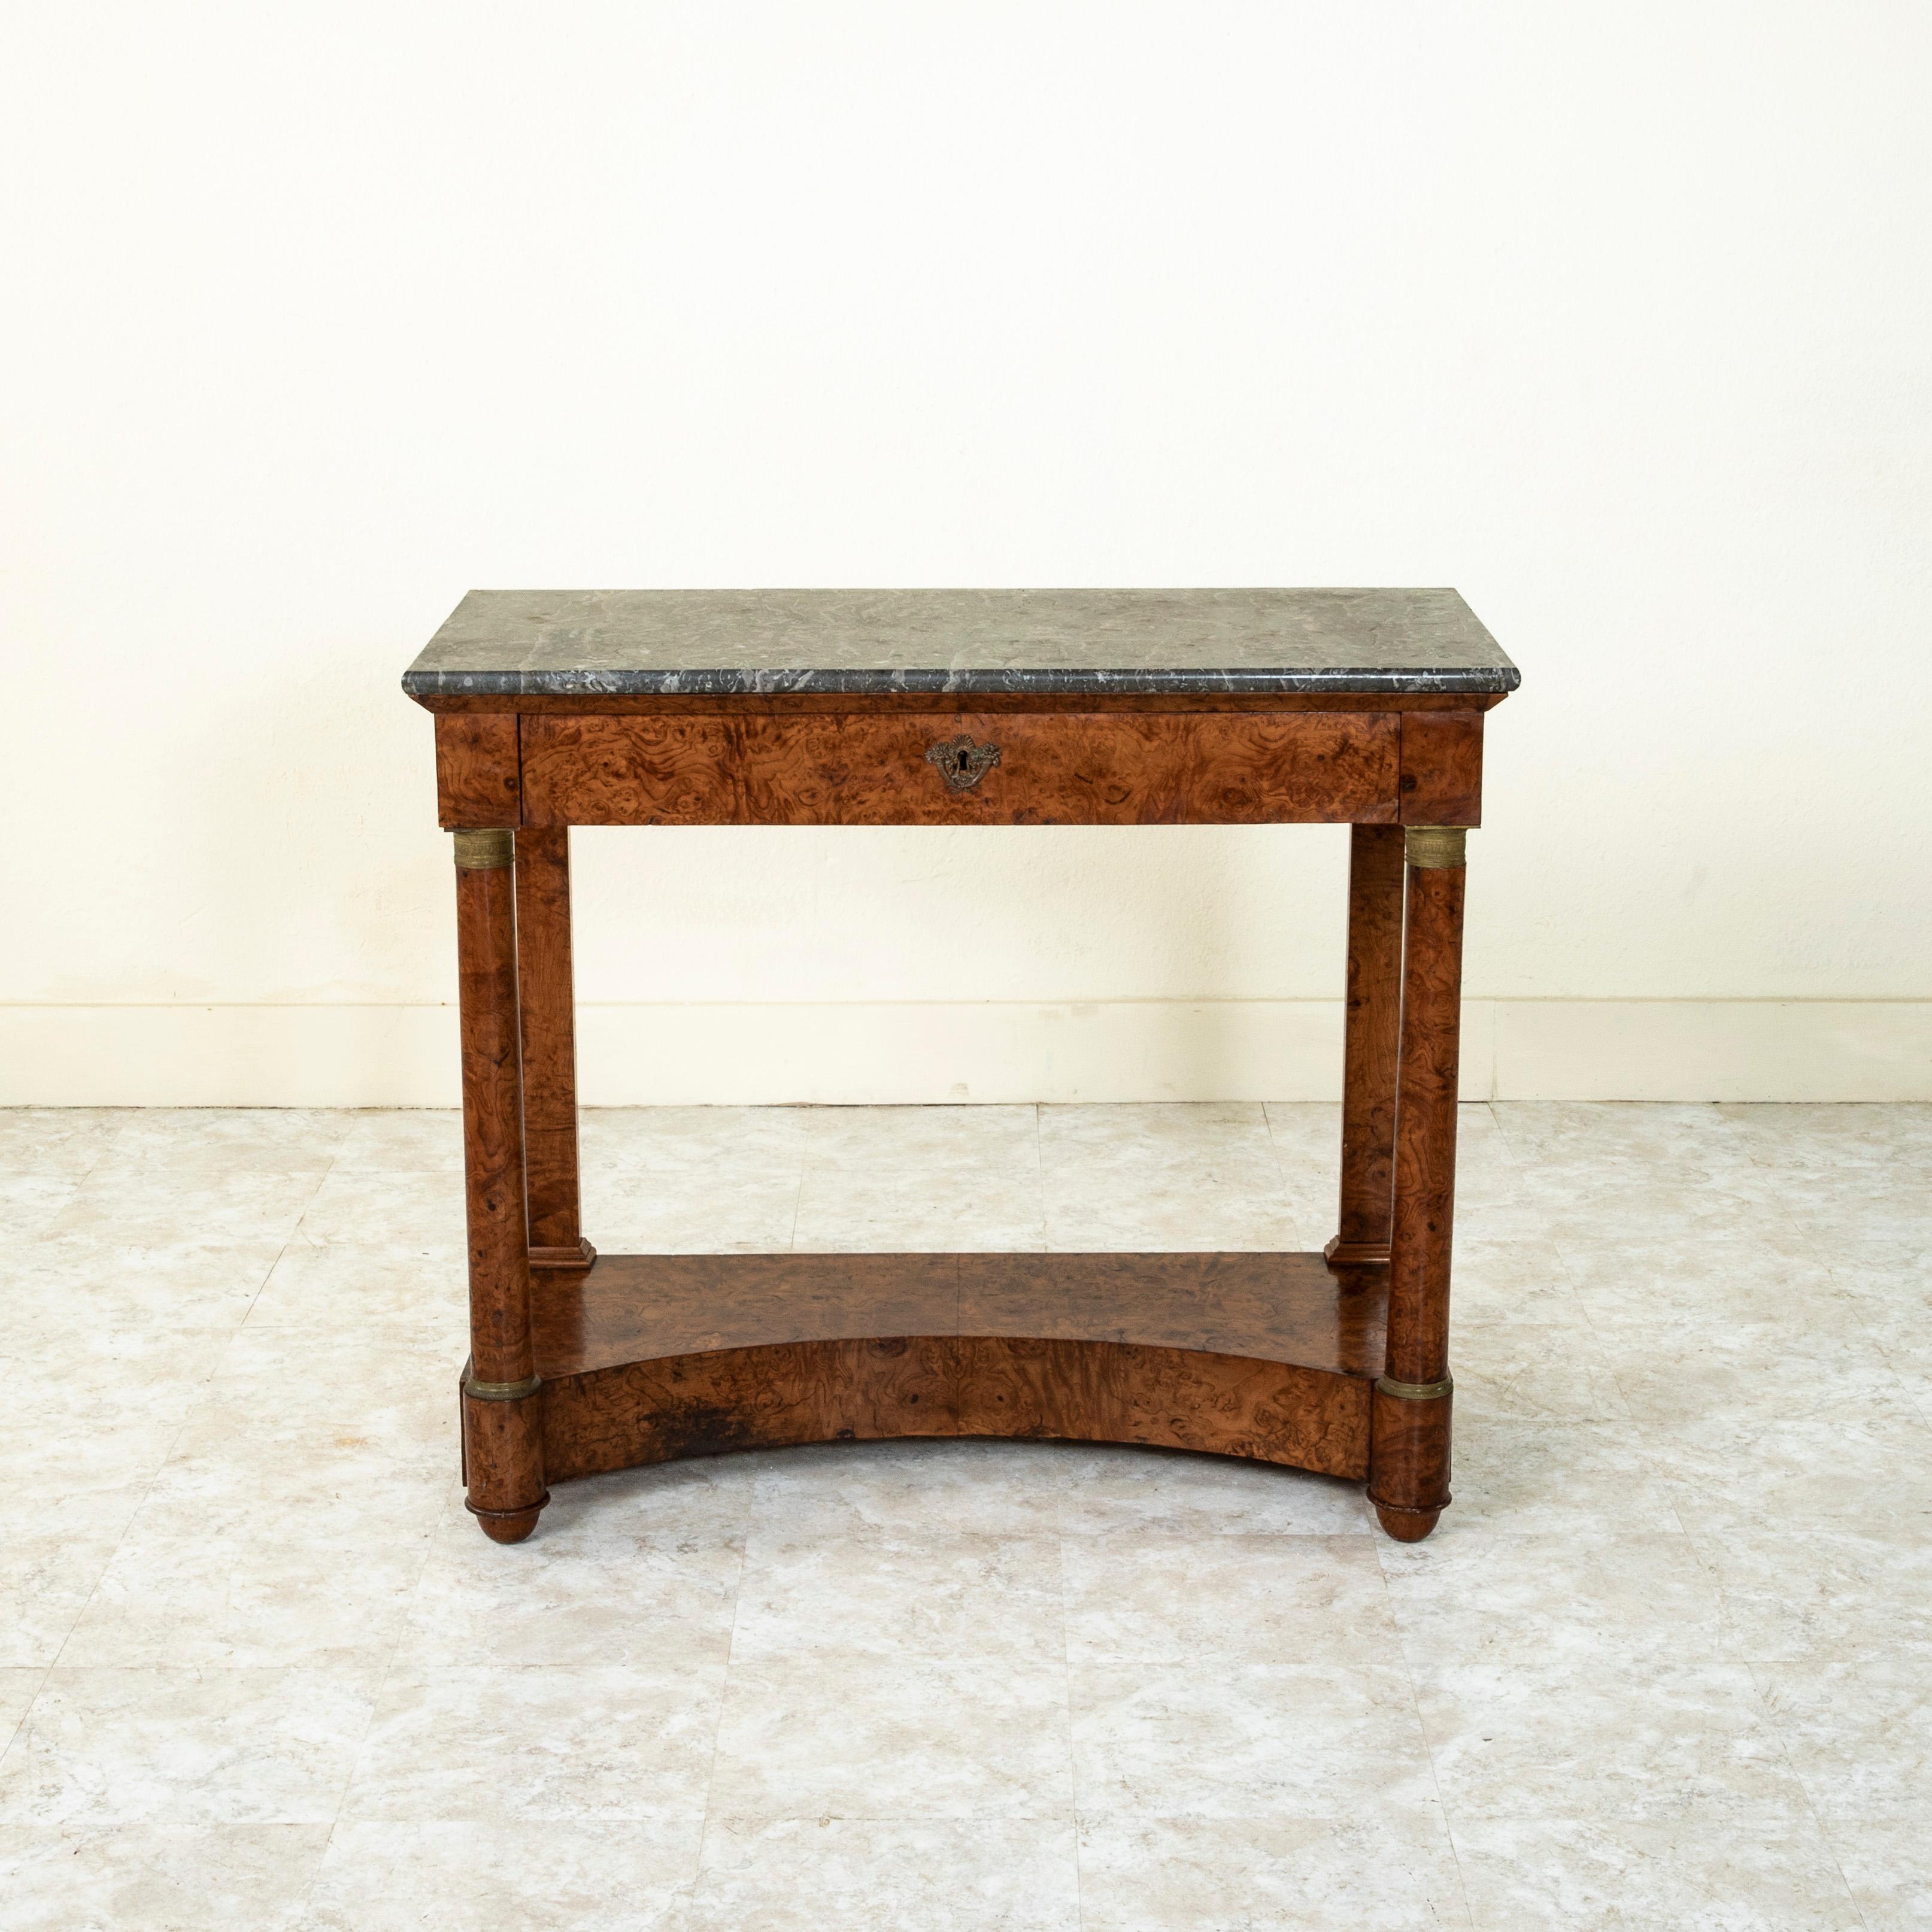 This early nineteenth century French Empire period burl walnut console table features columns at the front corners and a Saint Anne marble top. The columns are detailed with bronze capitals and bases detailed with spiral beading and palmettes. A